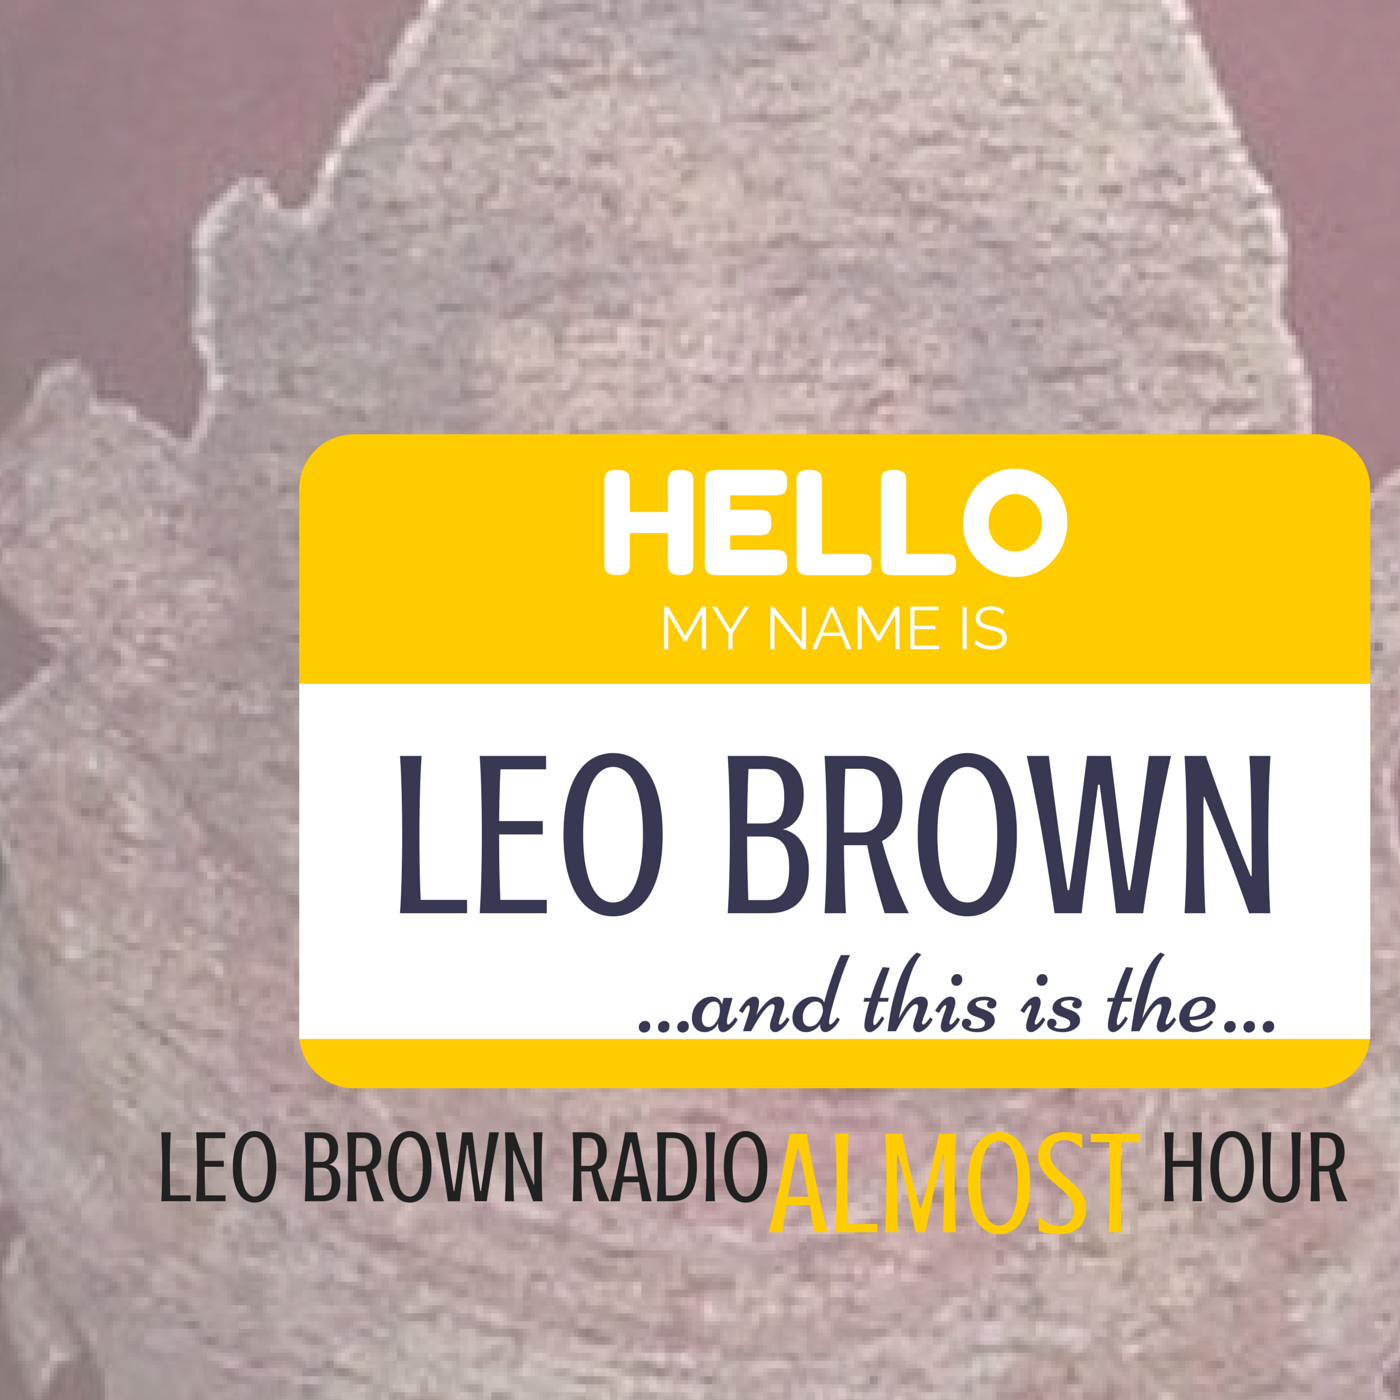 Leo Brown Almost Hour 02/22/17